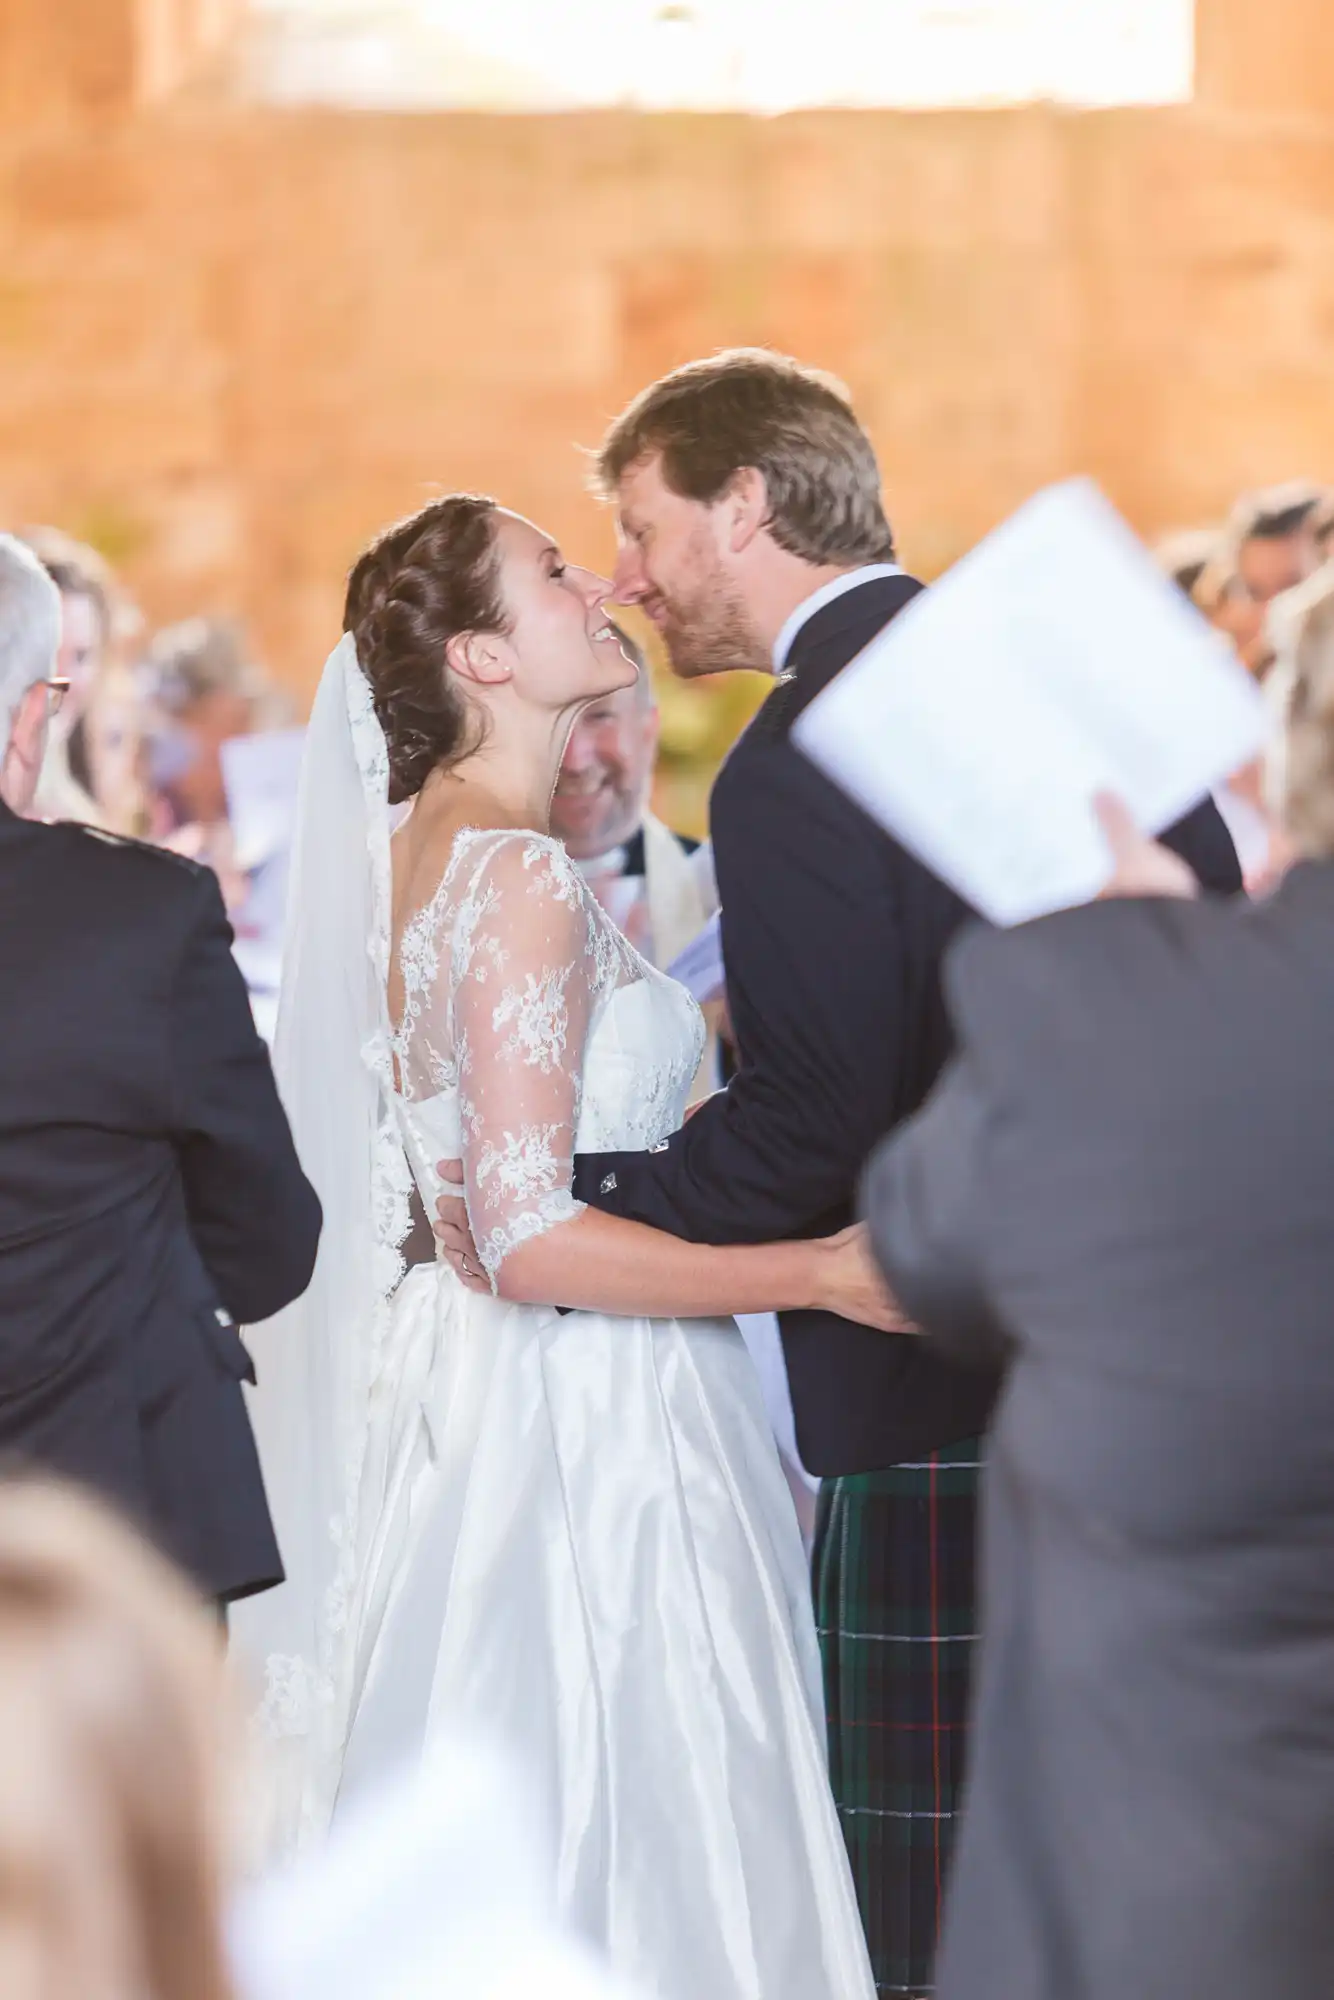 A bride and groom share a kiss, the bride in a white lace gown and the groom in a kilt, surrounded by wedding guests in a warmly lit setting.